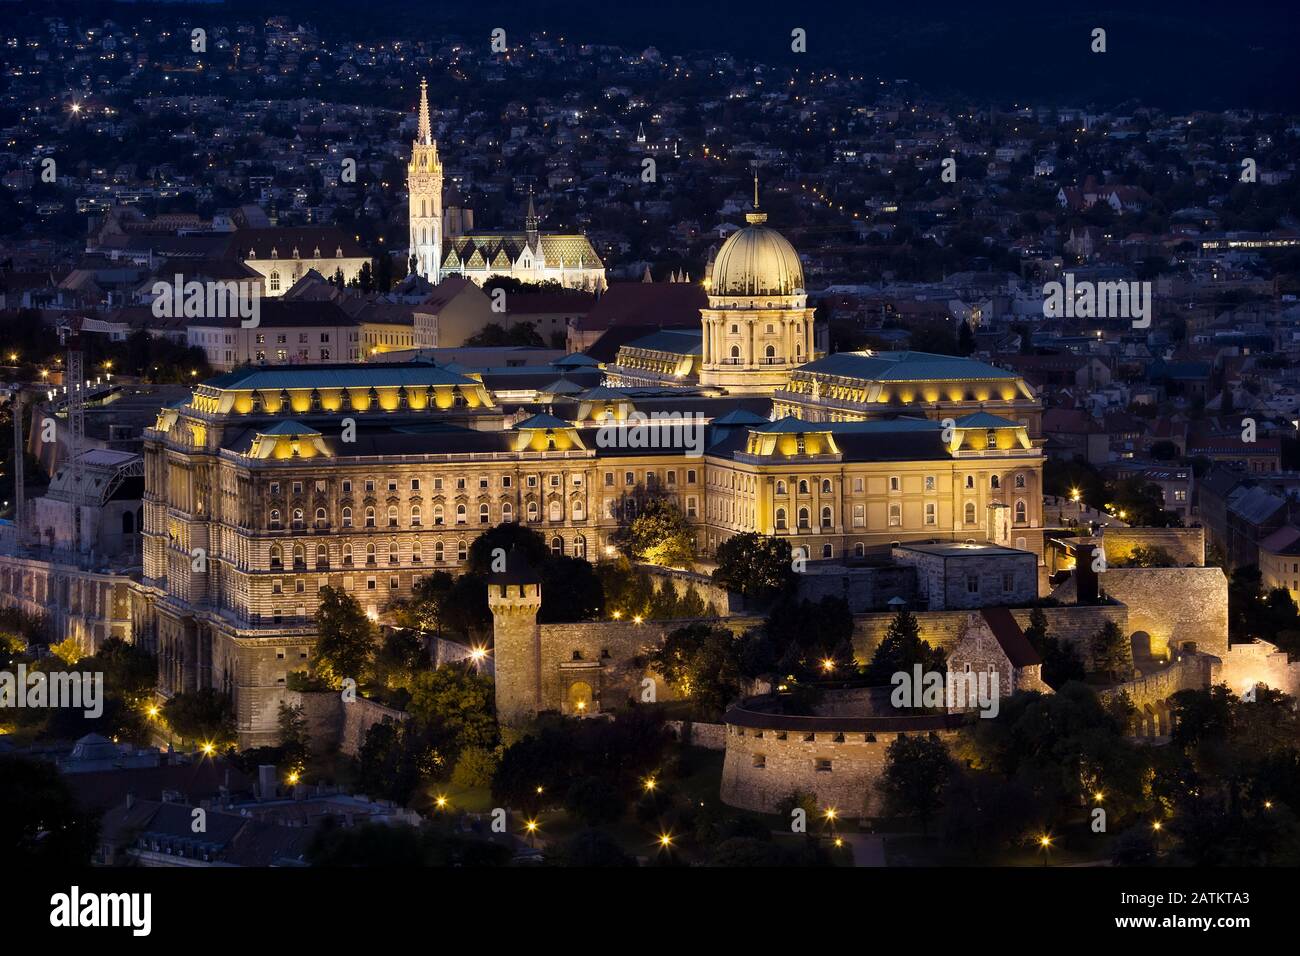 A night view of Buda Castle Royal Palace on the southern tip of Castle Hill int the Buda side of Budapest, Hungary. A UNESCO World Heritage Site. Stock Photo